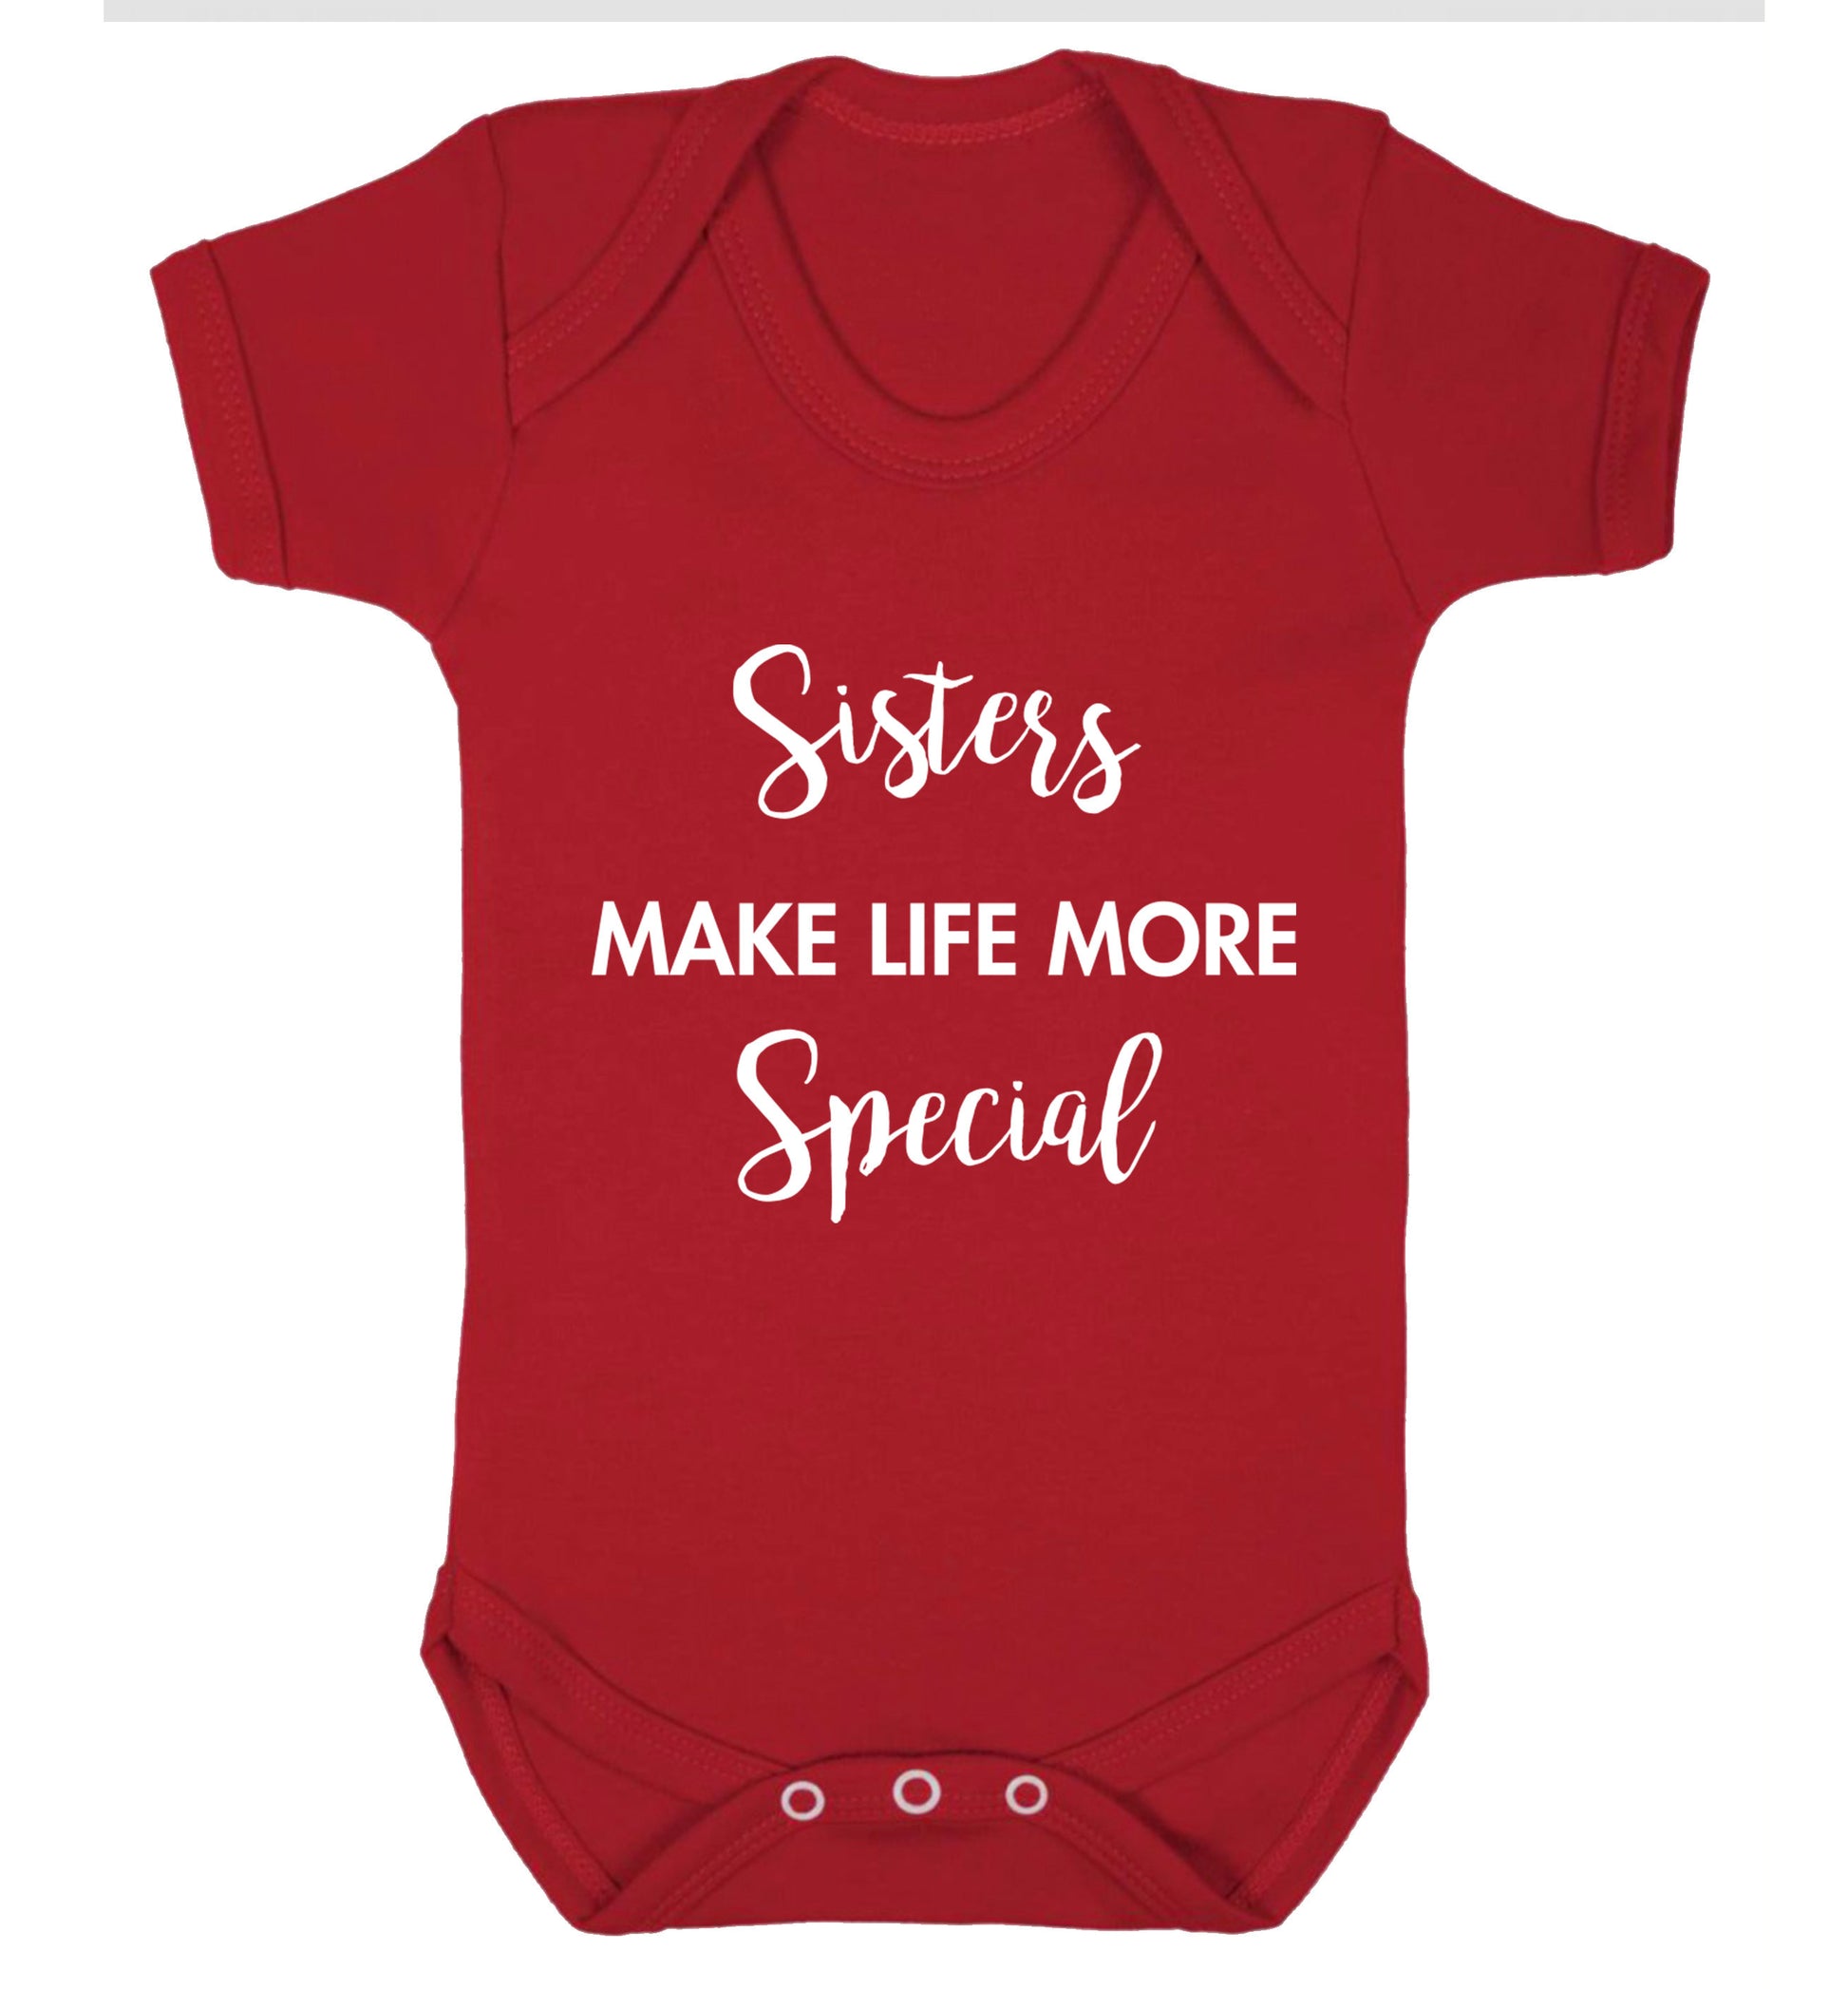 Sisters make life more special Baby Vest red 18-24 months